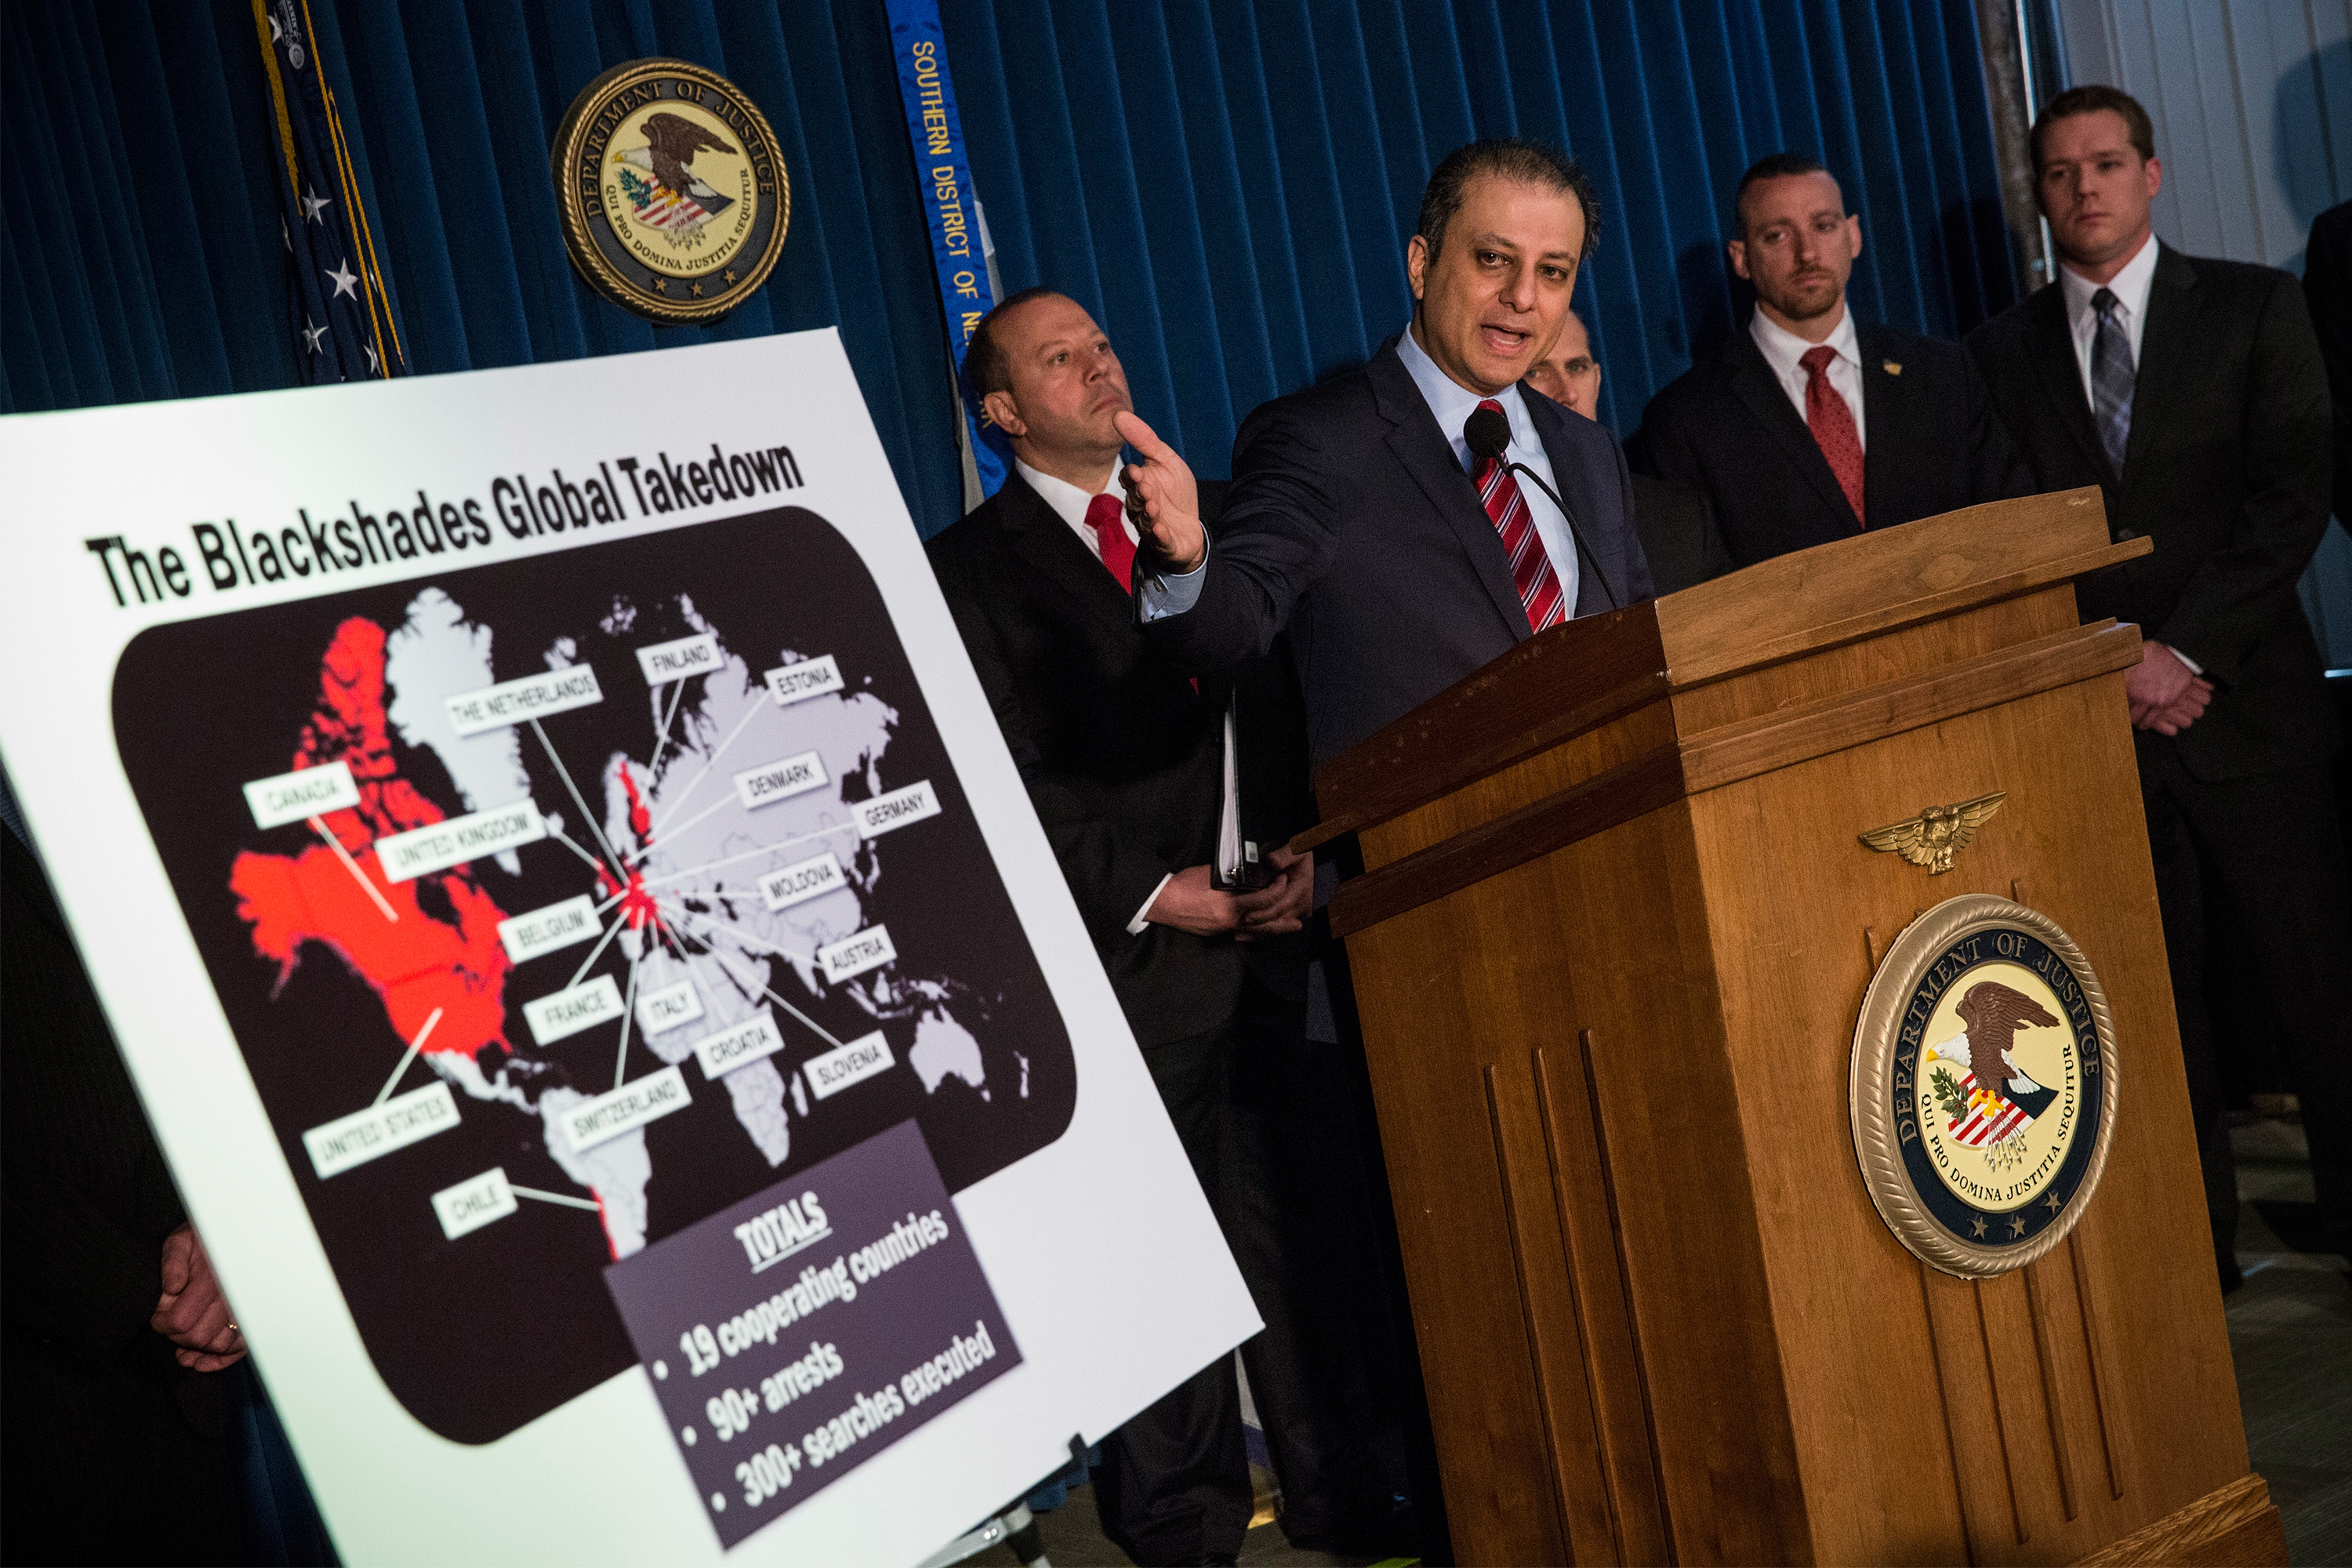 Preet Bharara, U.S. Attorney for the Southern District of New York, announces a massive law enforcement action targeting the creators of the Blackshades software - a malicious computer software that was openly sold on a website- on May 19, 2014 in New York City. (Andrew Burton—Getty Images)